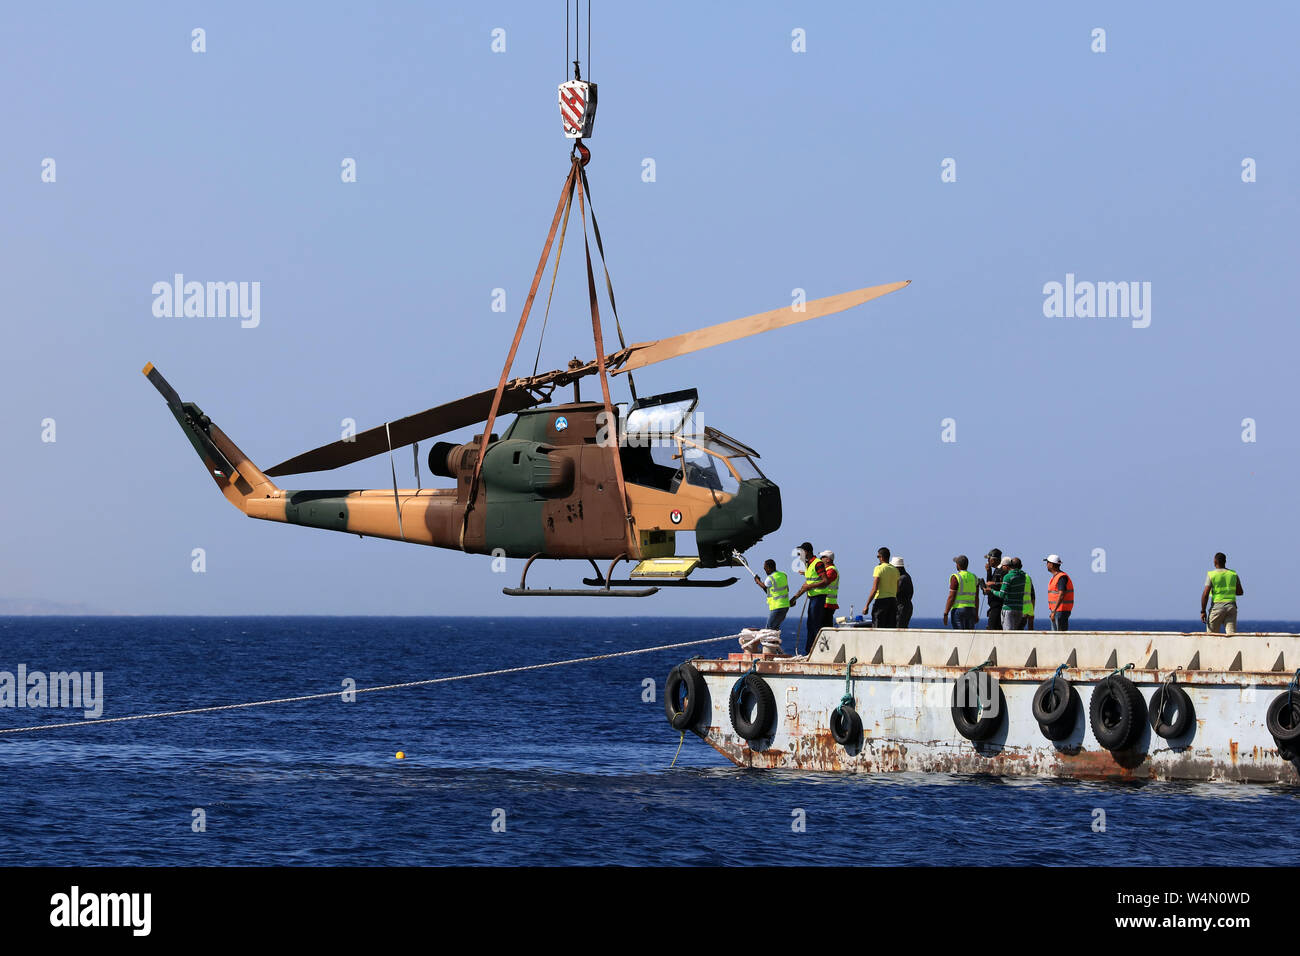 (190724) -- AMMAN, July 24, 2019 (Xinhua) -- A body of a military helicopter, donated by the Jordanian Royal Air Force, is submerged in the Red Sea off Aqaba, as part of a new underwater military museum, in south Jordan, July 24, 2019. The museum is built by Aqaba Special Economic Zone to attract more tourists in summer, (Photo by Mohammad Abu Ghosh/Xinhua) Stock Photo